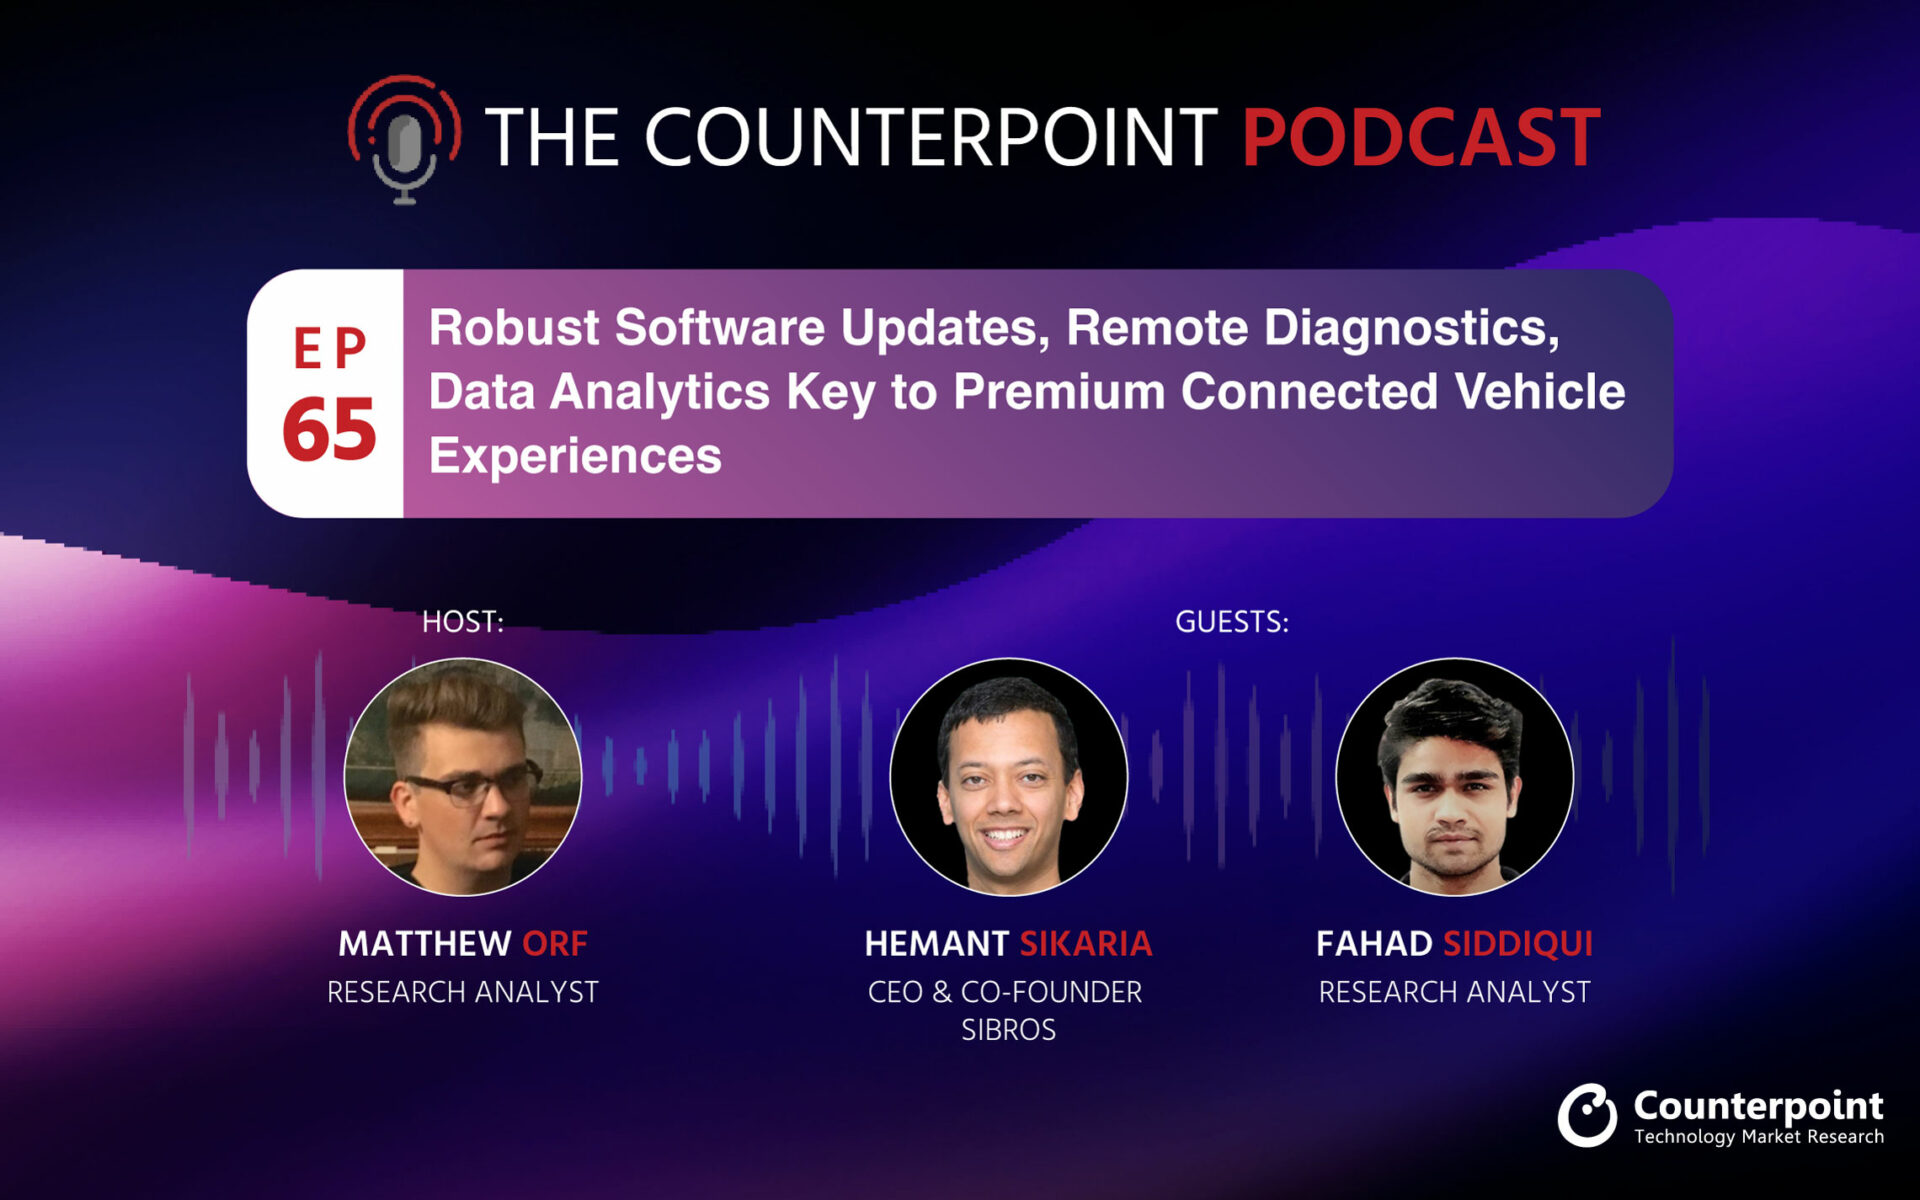 Podcast #65: Robust Software Updates, Remote Diagnostics, Data Analytics Key to Premium Connected Vehicle Experiences